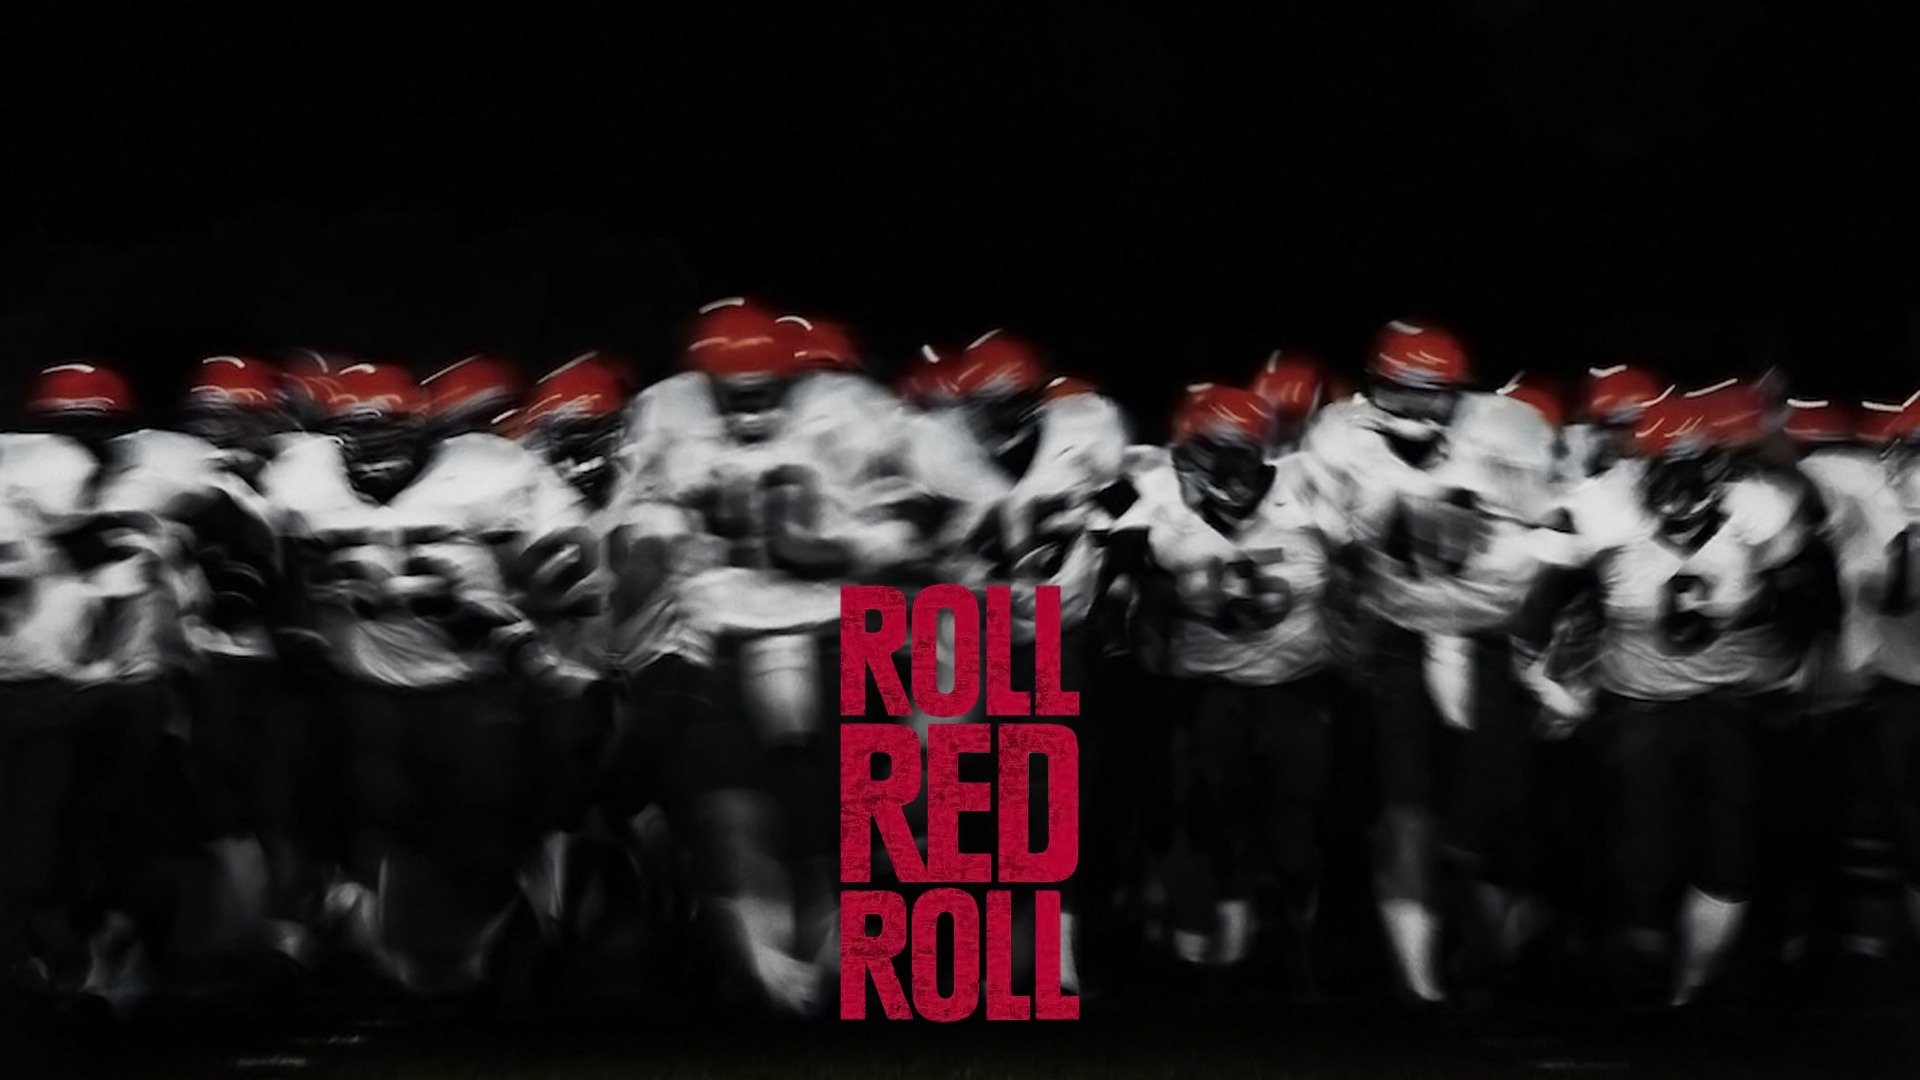 Roll and Red.